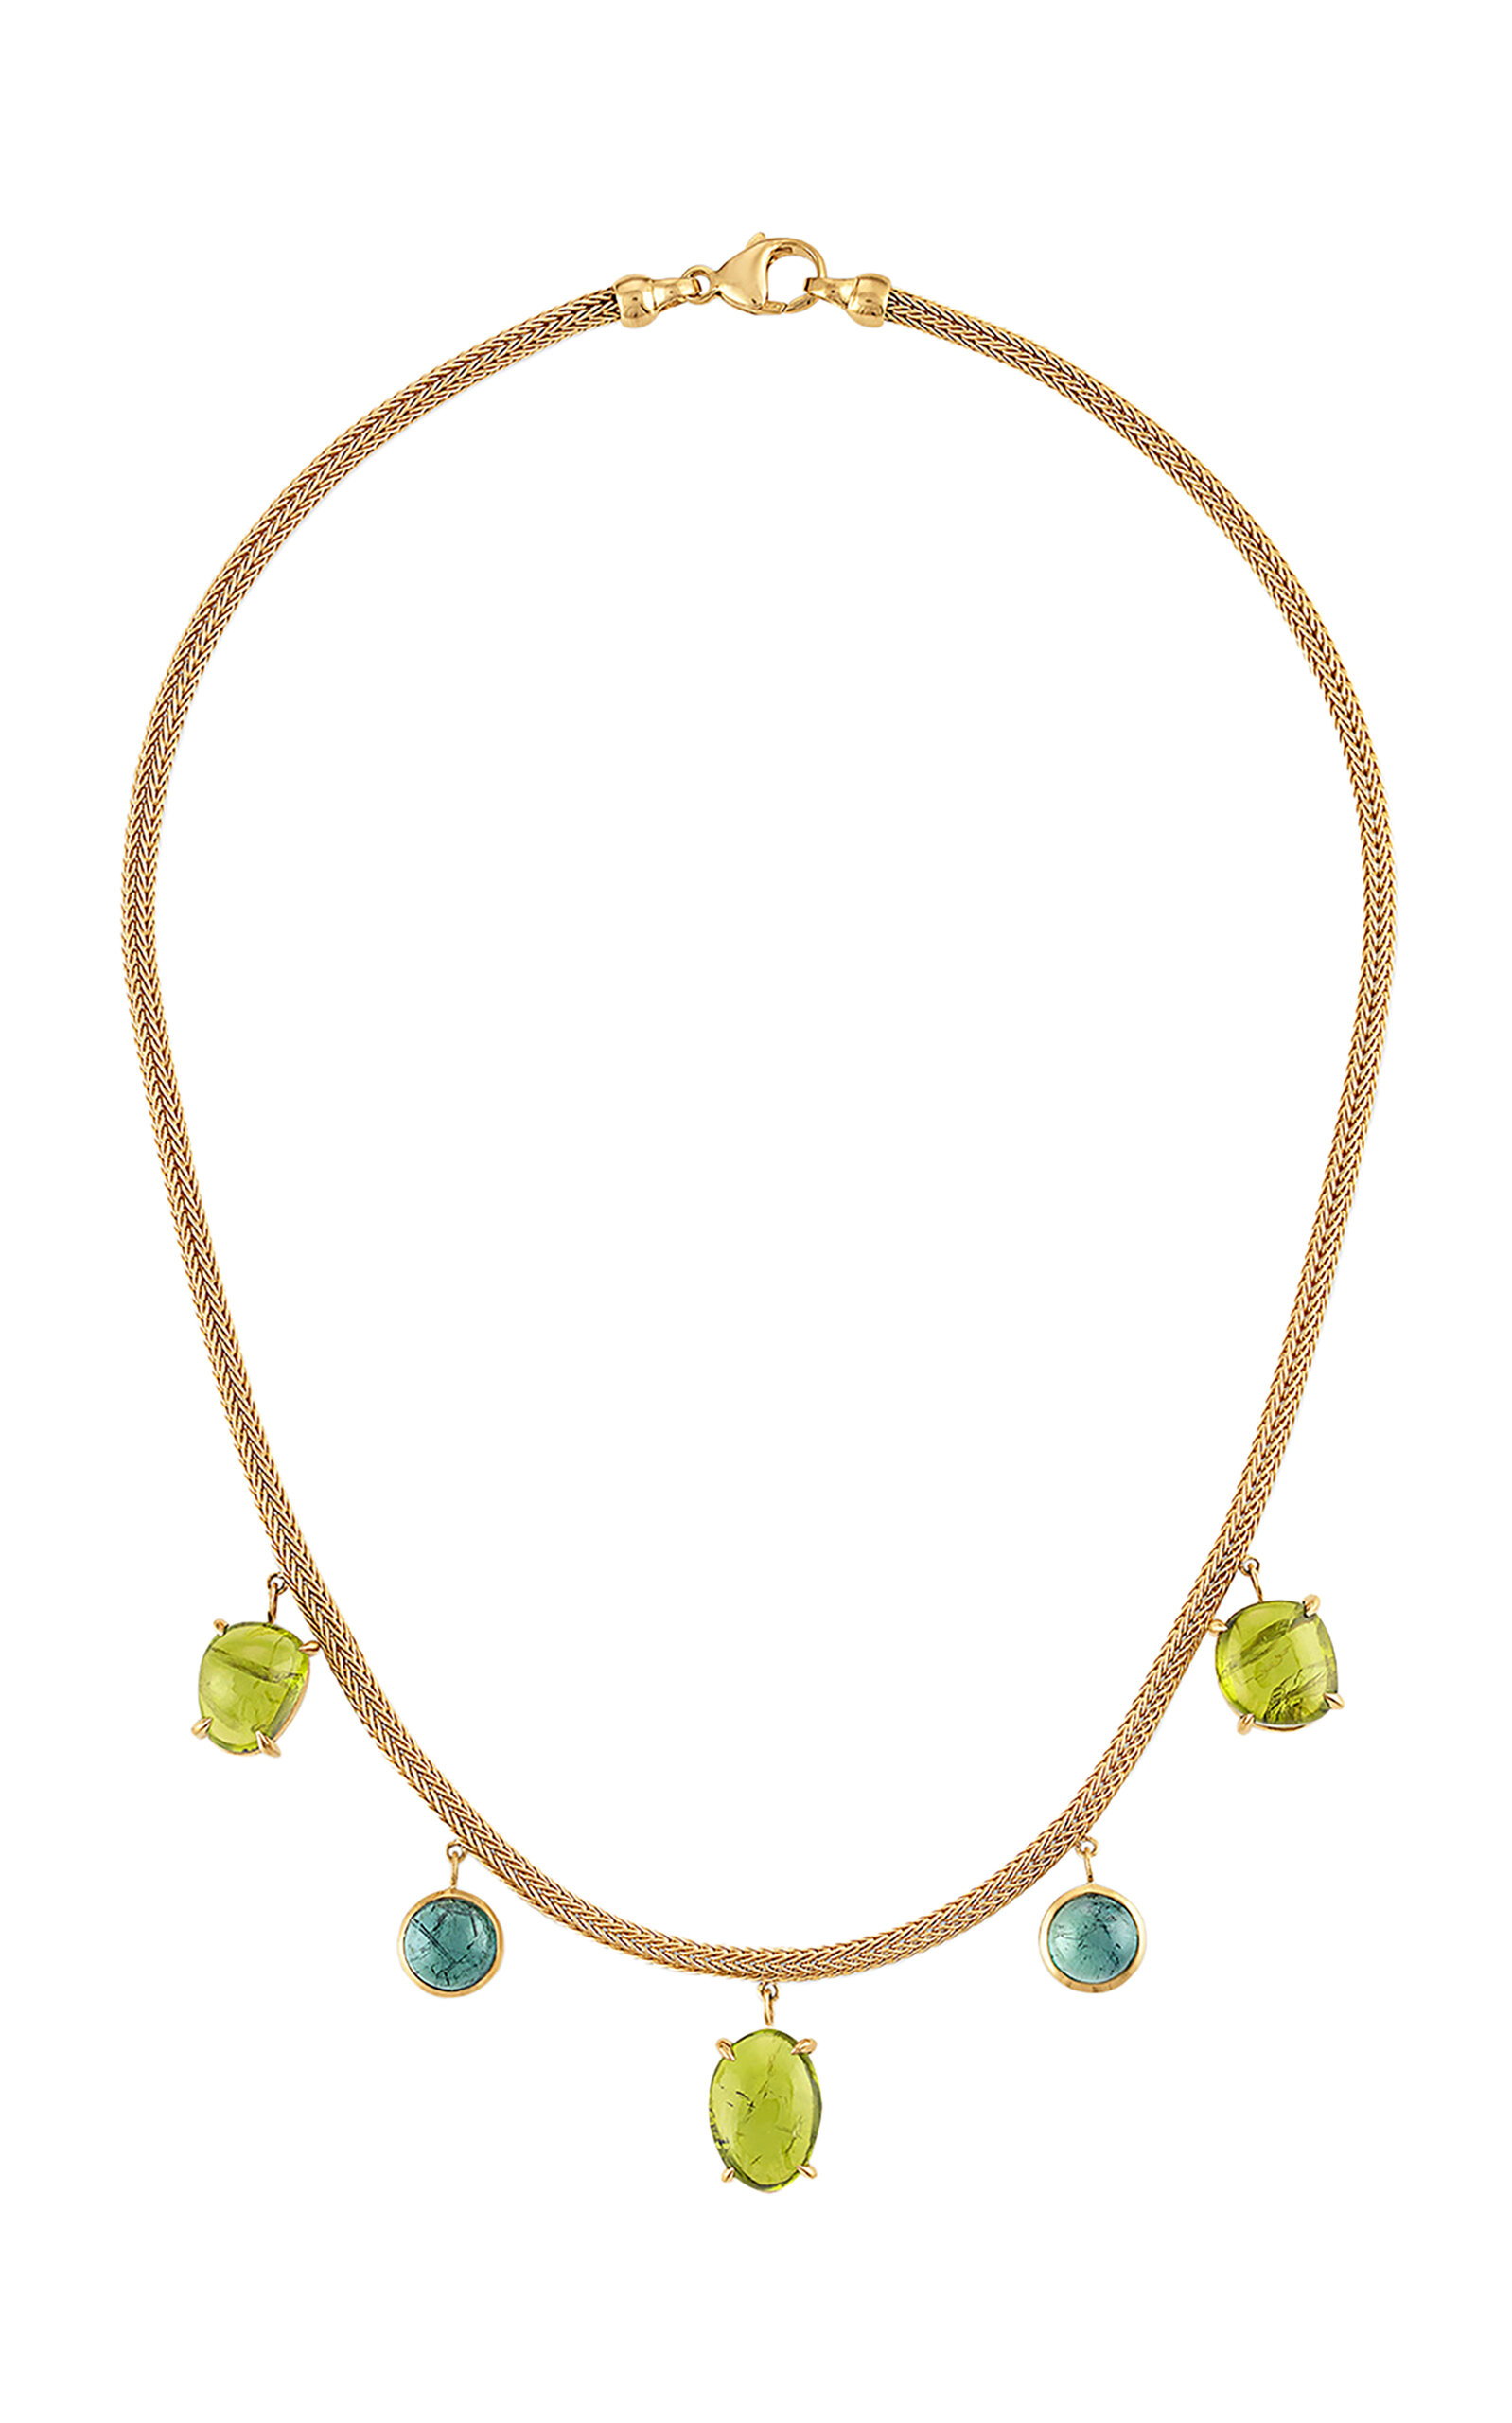 18k Yellow Gold Leo Necklace with Peridot and Green Tourmaline